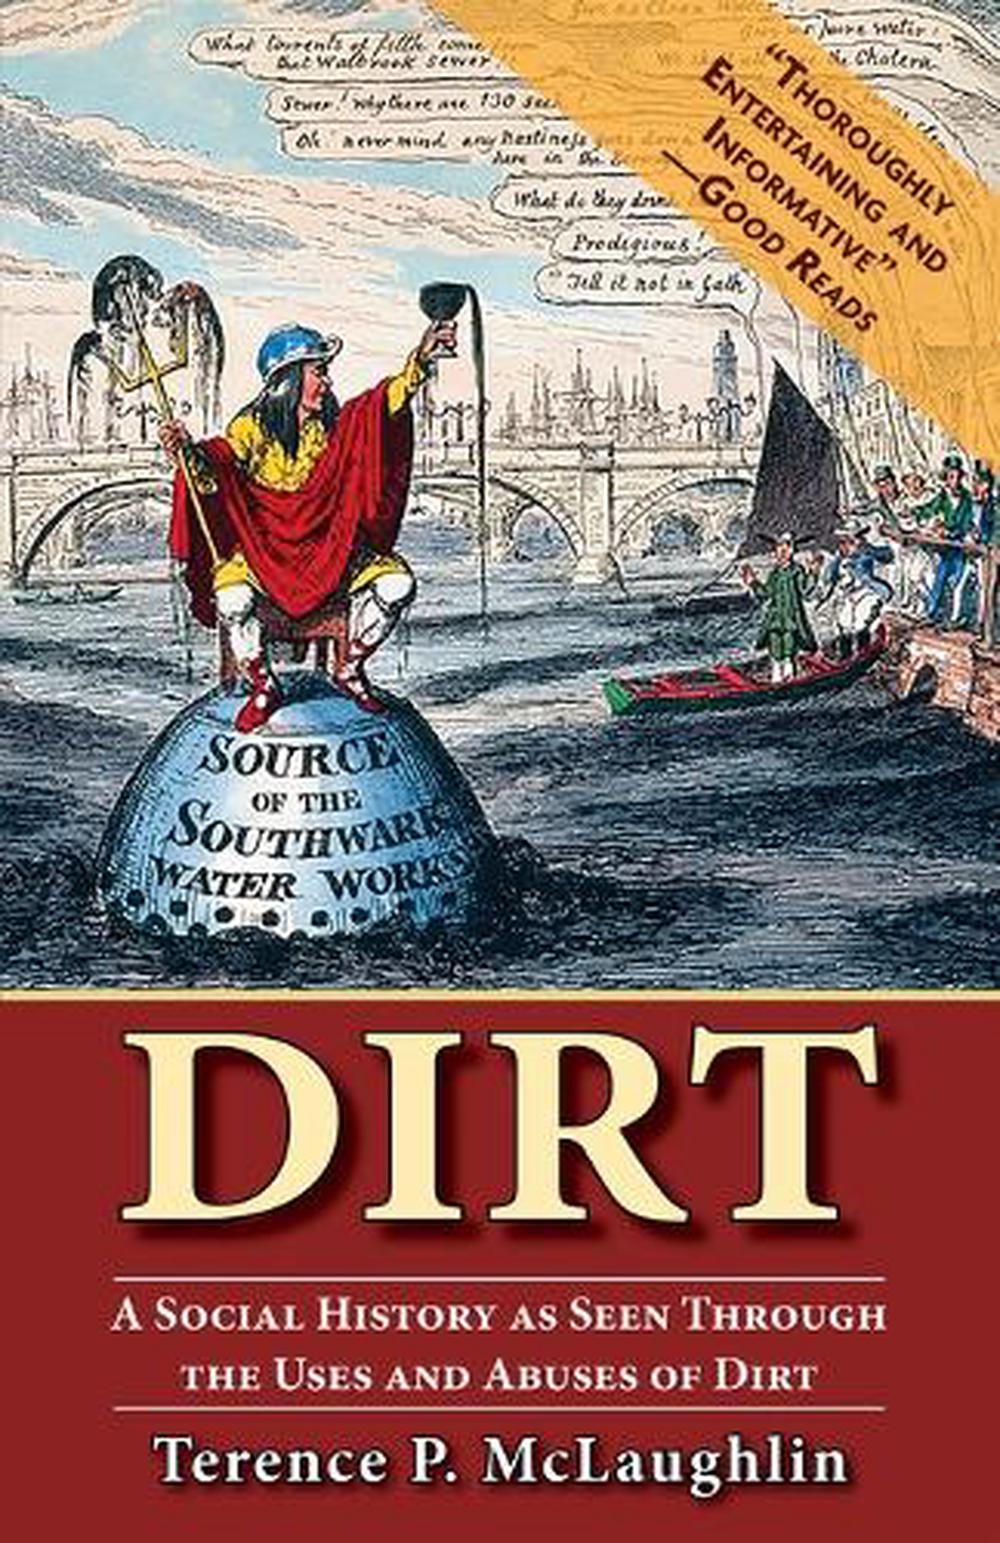 Dirt A Social History As Seen Through the Uses and Abuses of Dirt by